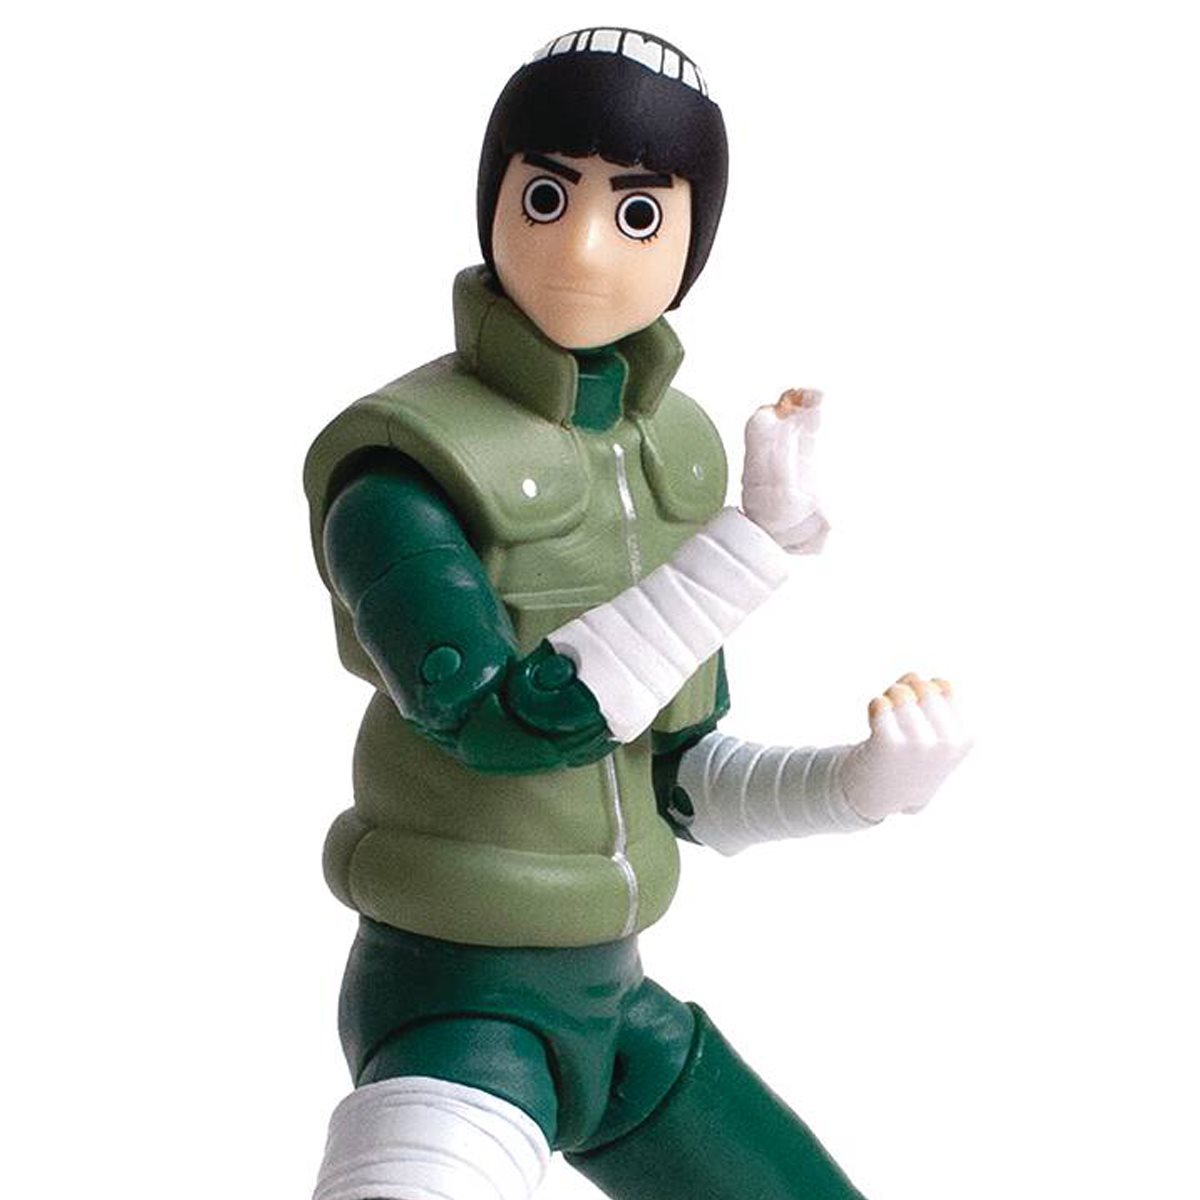 amanda kindig recommends Pictures Of Rock Lee From Naruto